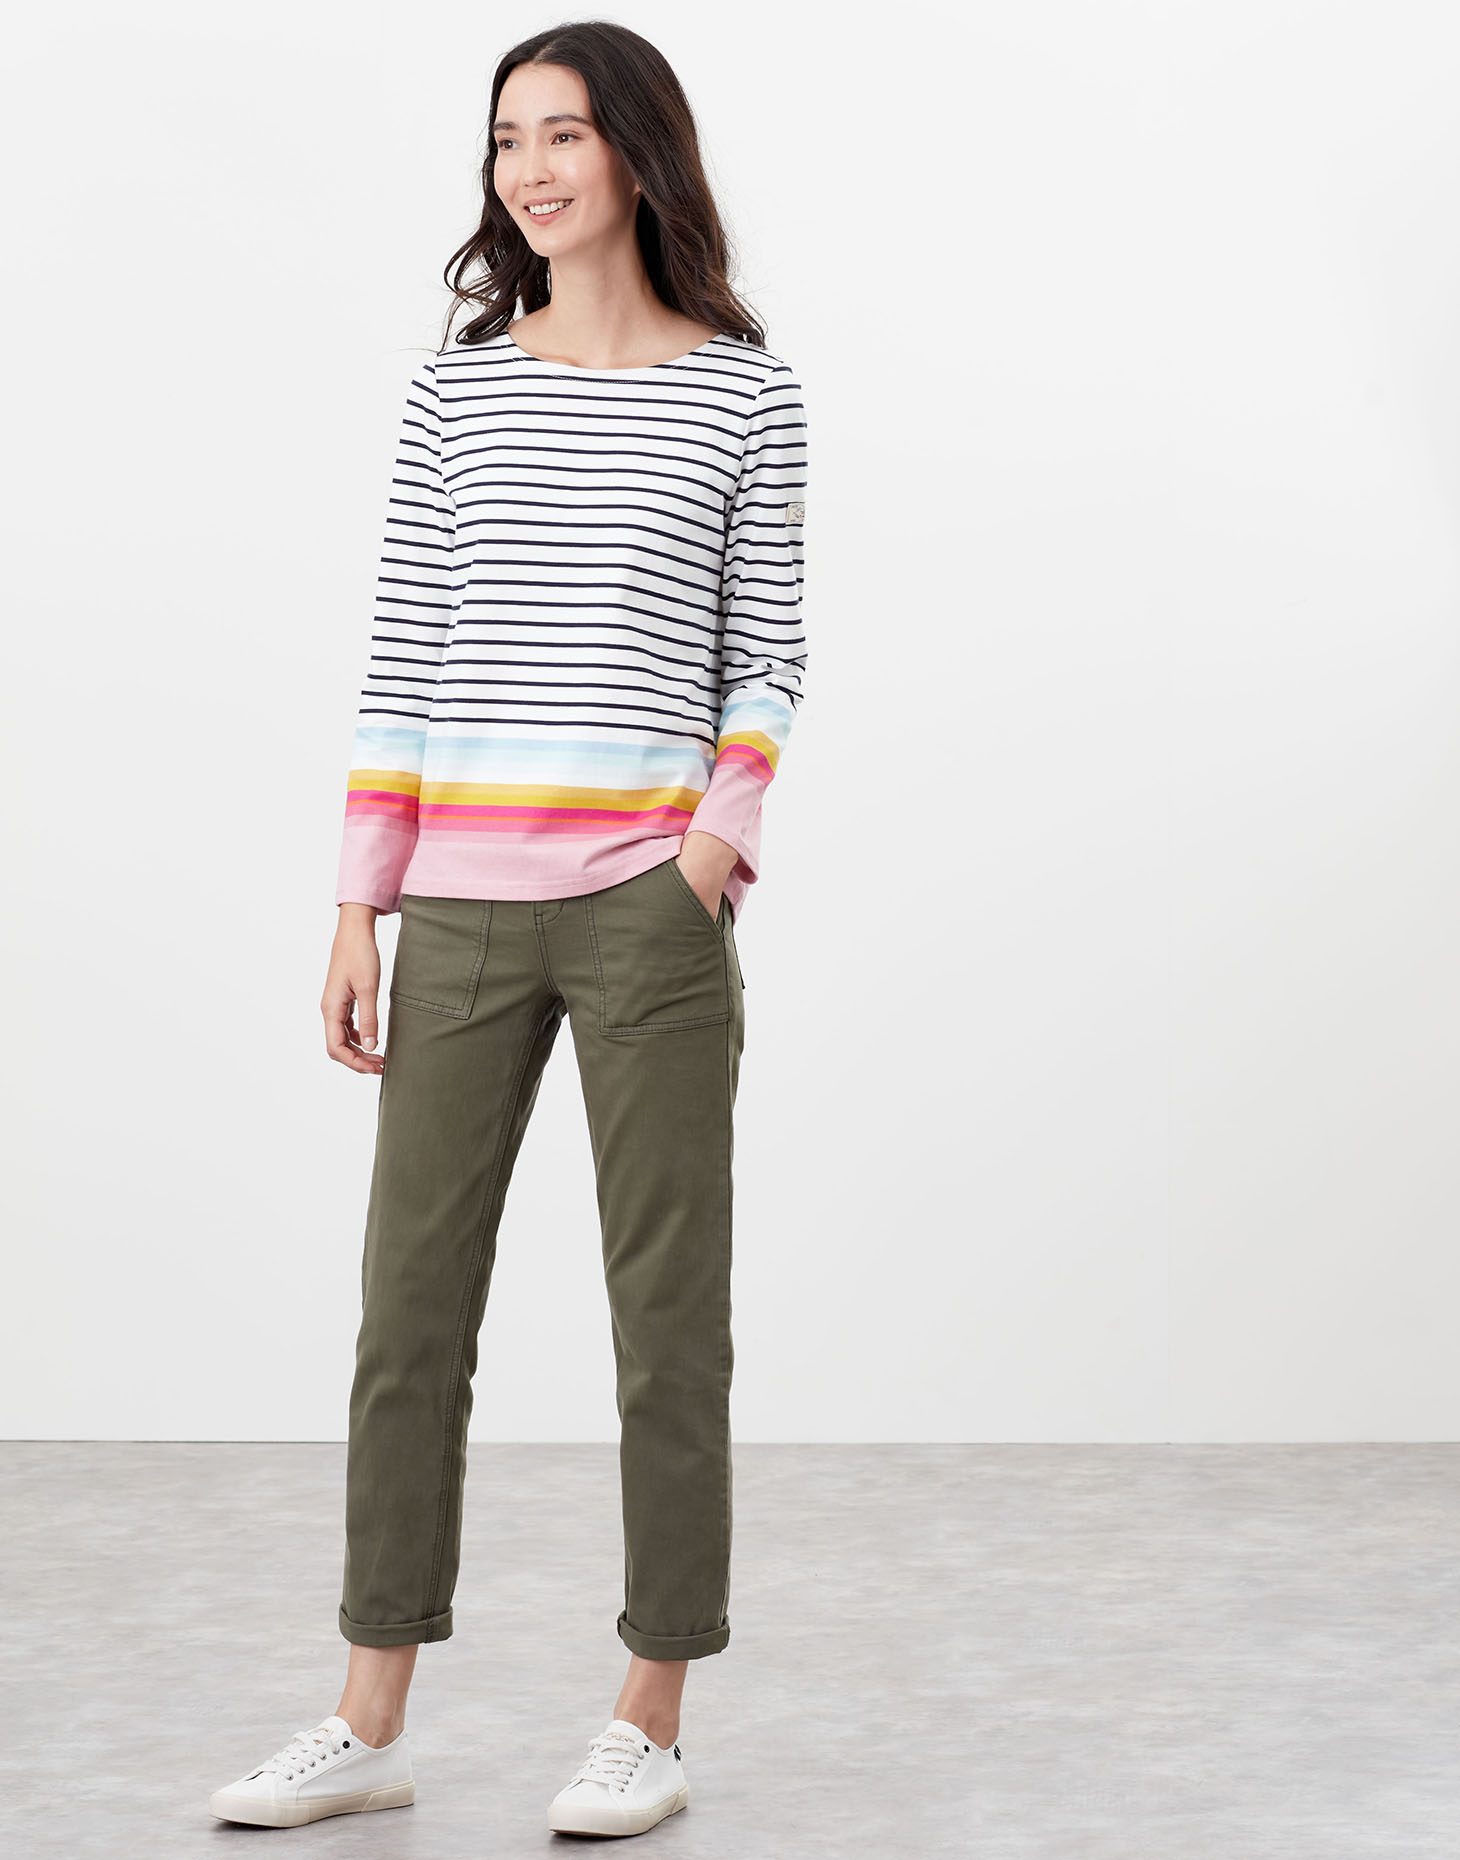 Joules 212831 Harbour Long Sleeve Jersey Top - Joules - Barsleys ...